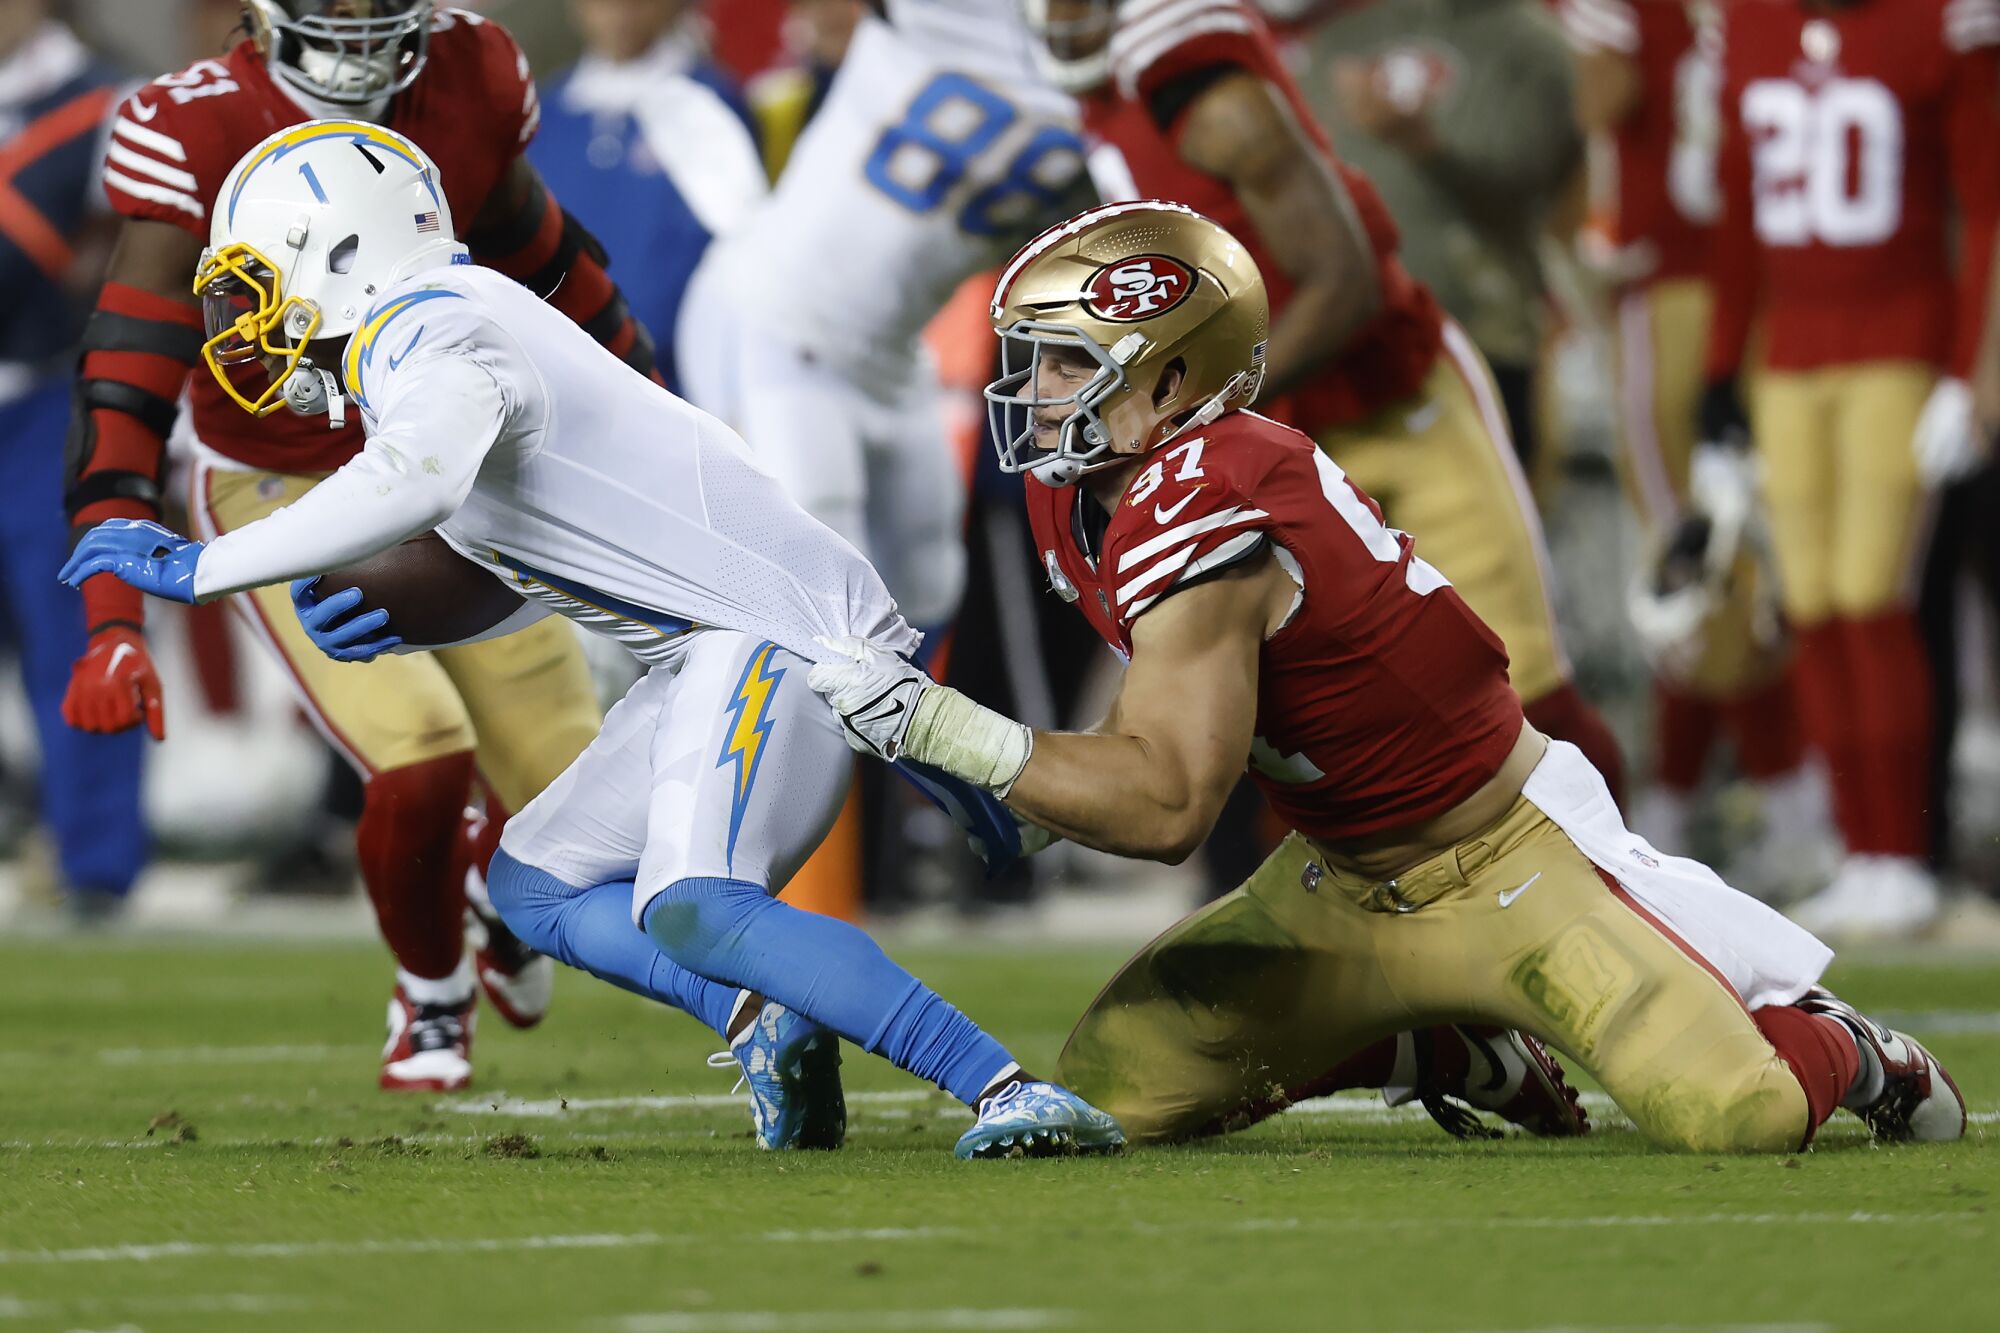 Injury-depleted Chargers can't overcome late 49ers surge in loss - Los Angeles Times